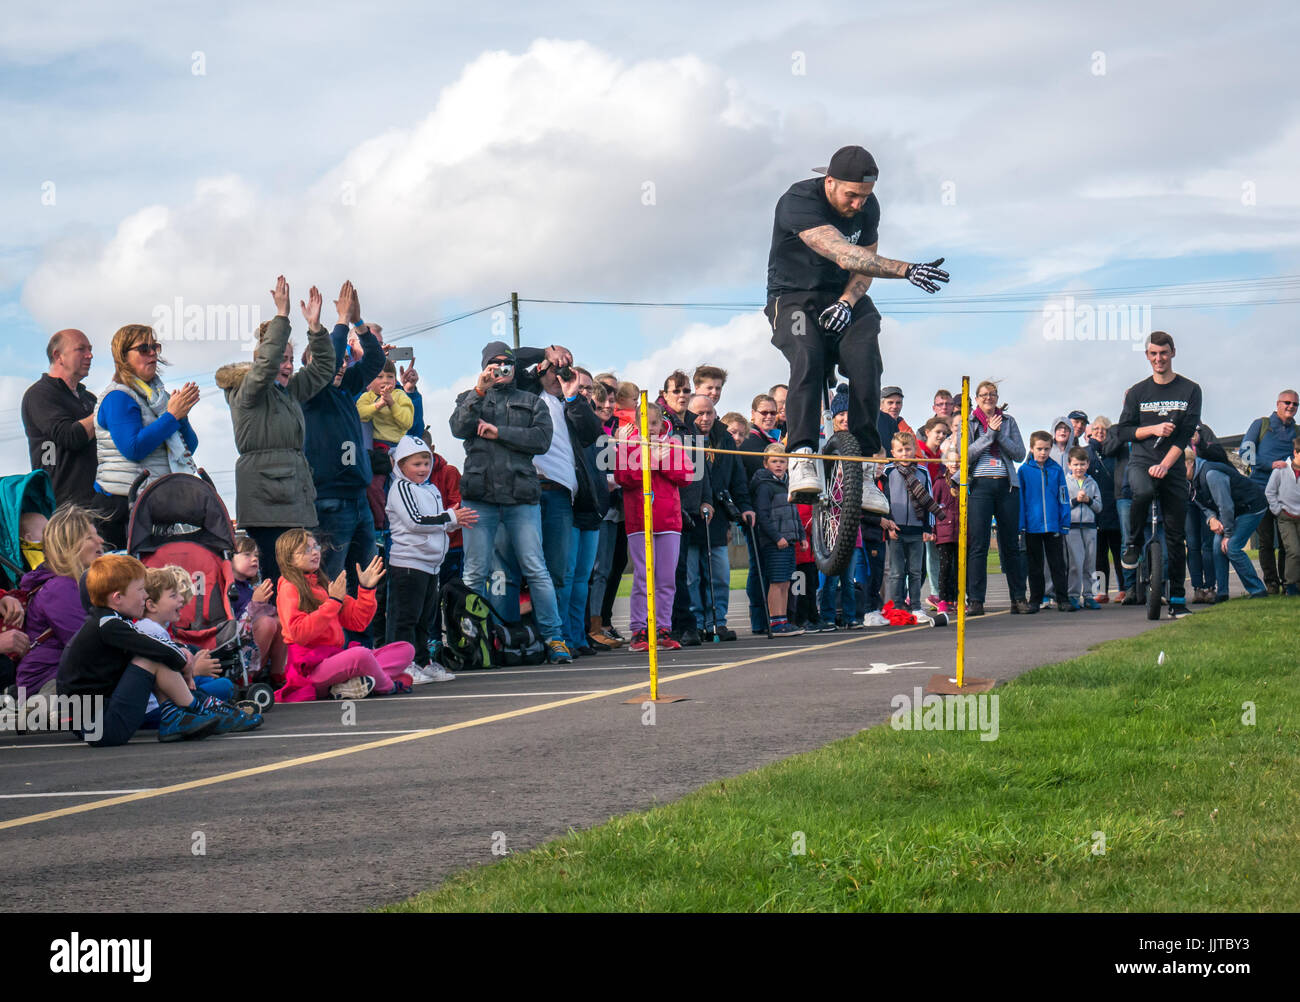 Jason Auld of Team Voodoo unicycles performing stunt leap at Wheels and Wings event 2016, East Fortune, East Lothian, Scotland, UK Stock Photo